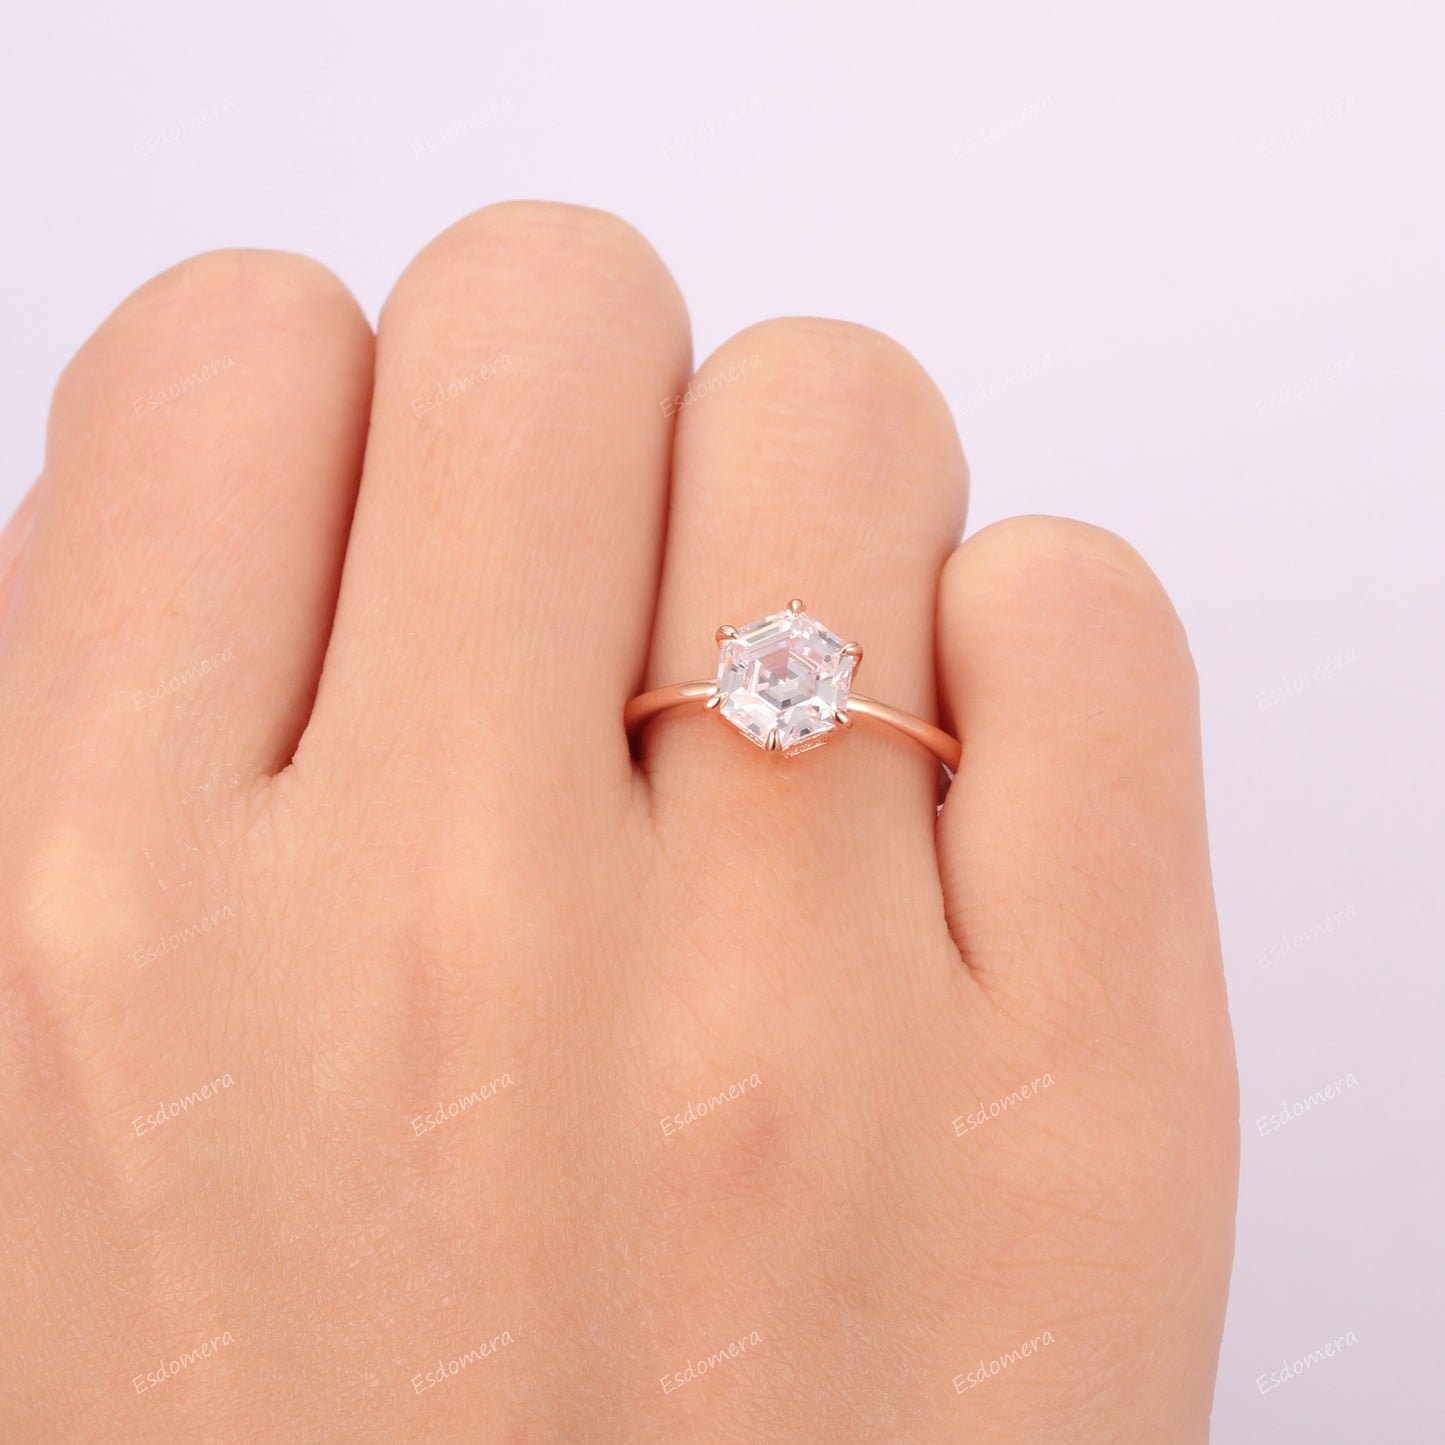 Unique Hexagon Cut 7mm Moissanite Solitaire Ring, Birthday Gift For Women, 14k Rose Gold Plain Band Engagement Ring